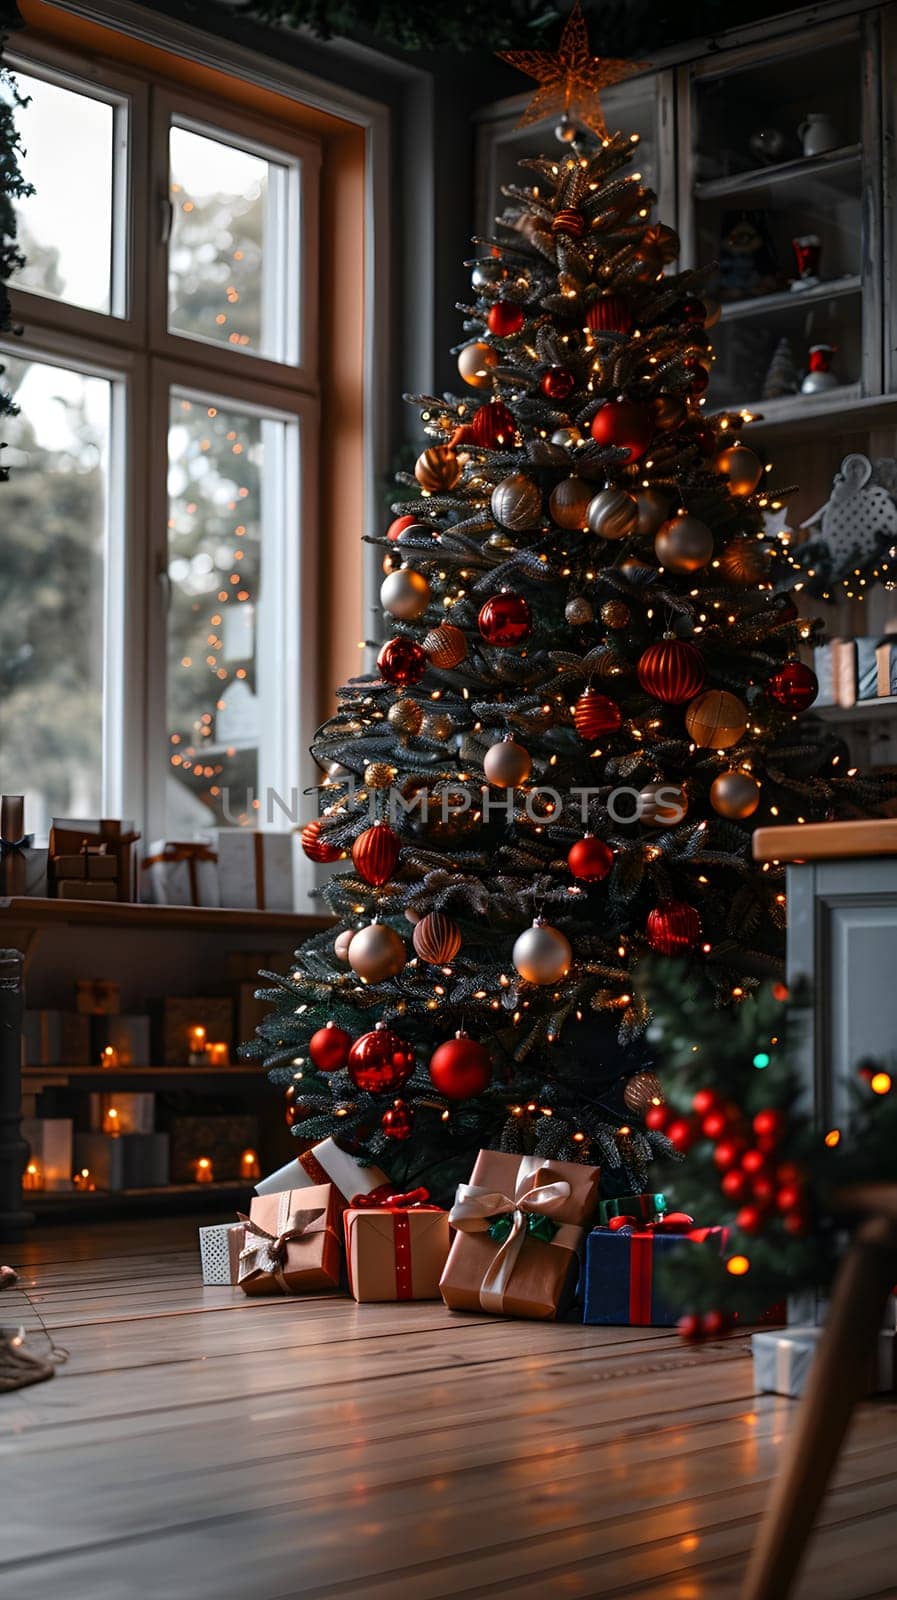 A Christmas tree with holiday ornaments stands in the living room, surrounded by gifts underneath. The evergreen tree complements the wooden interior design with festive Christmas decorations